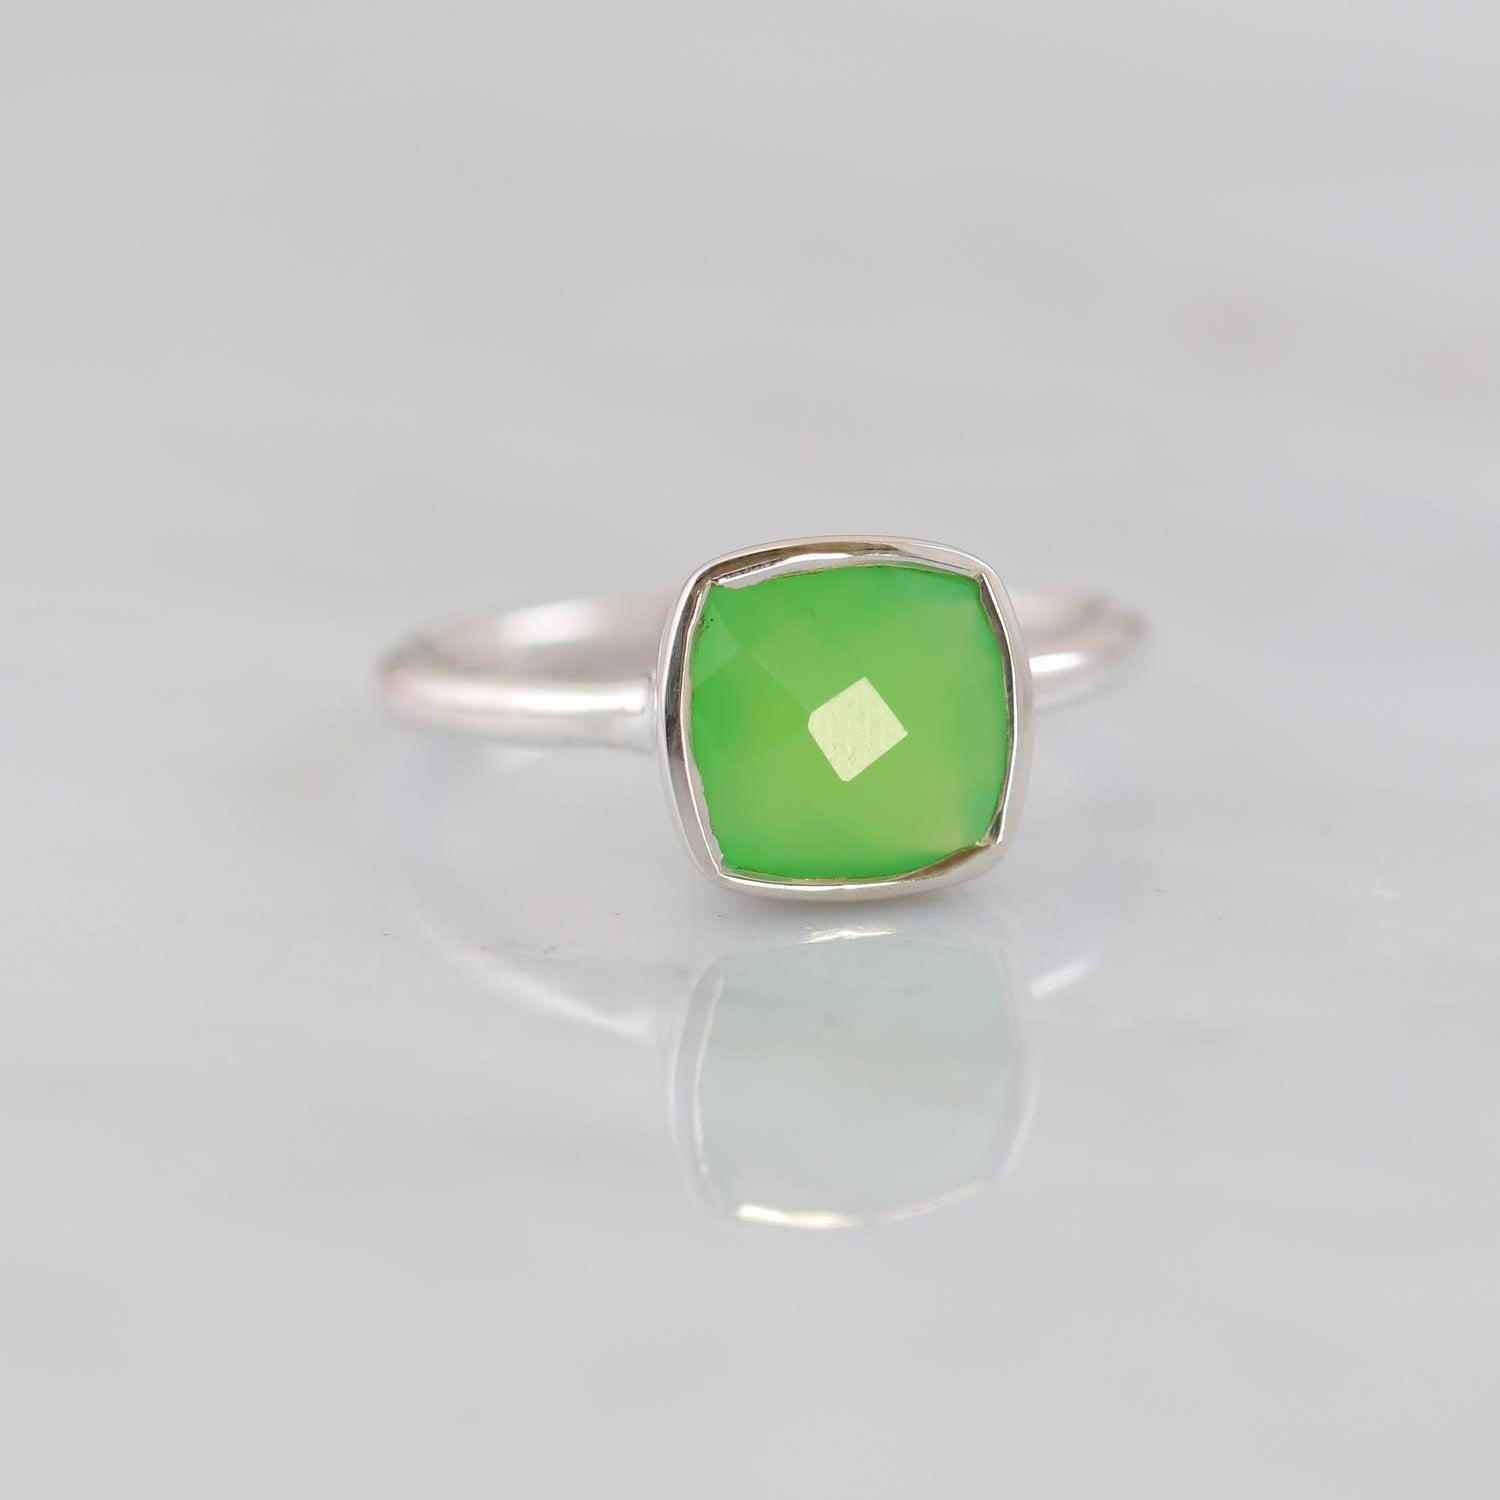 Chrysoprase Ring, Cushion Cut Ring, Sterling Silver Ring, Everyday Ring, Simple ring, Stacking ring, Bezel set ring, Faceted Cushion Ring